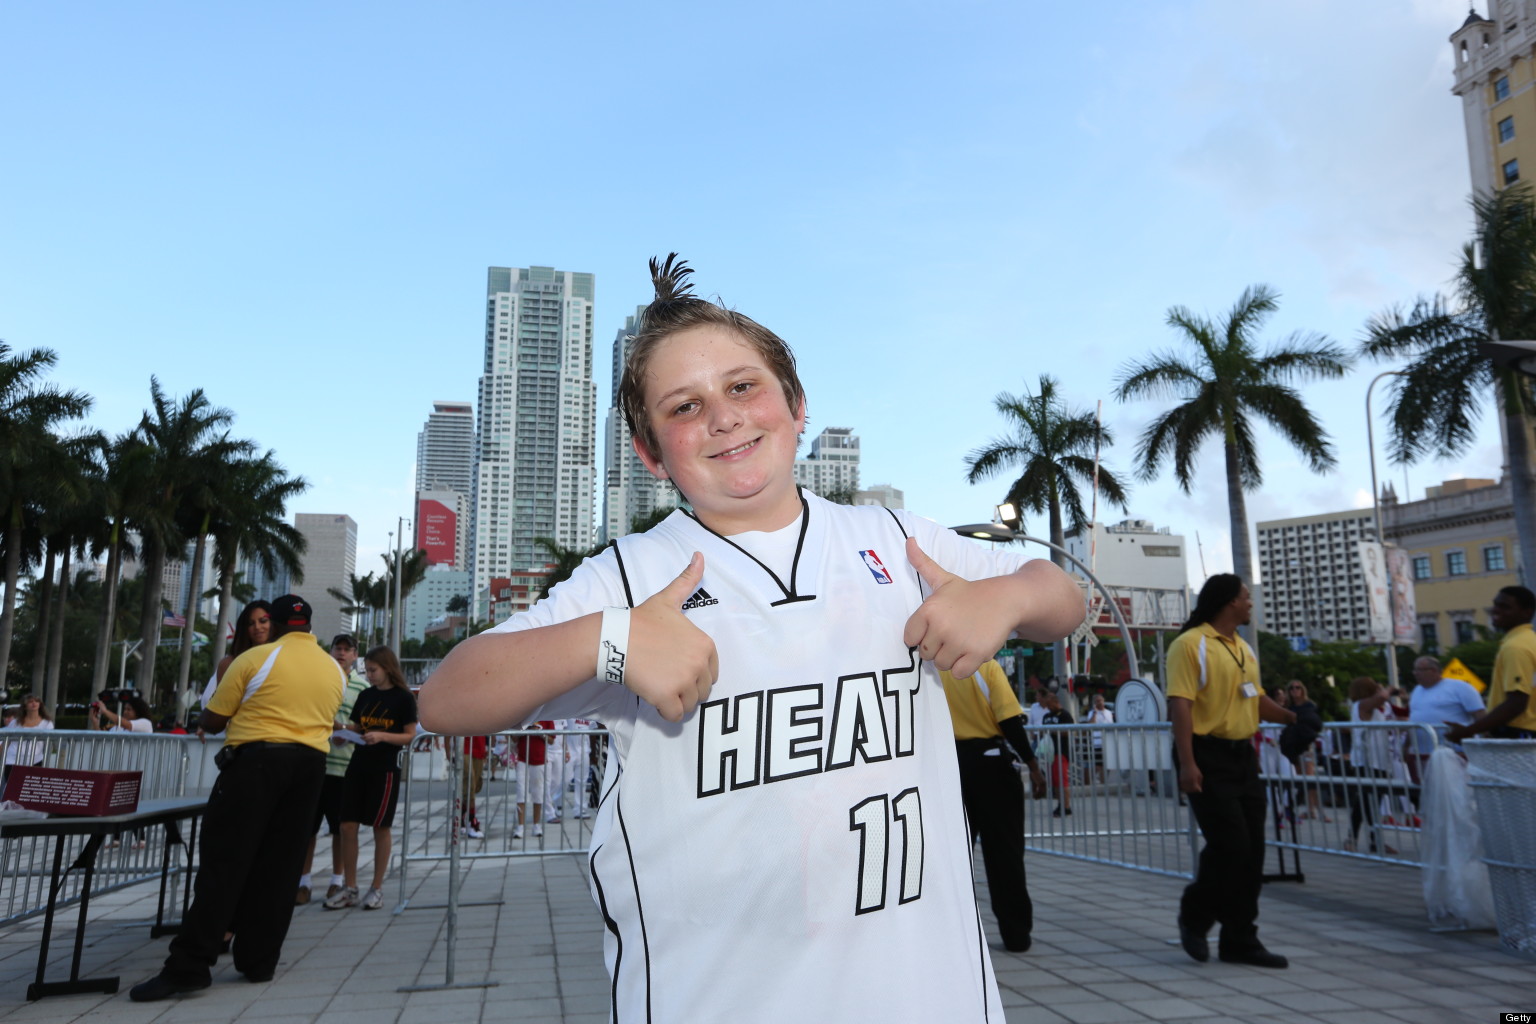 Miami Heat Fans Photos: White Hot Heat Supporters During The 2013 NBA Playoffs (PHOTOS)1536 x 1024